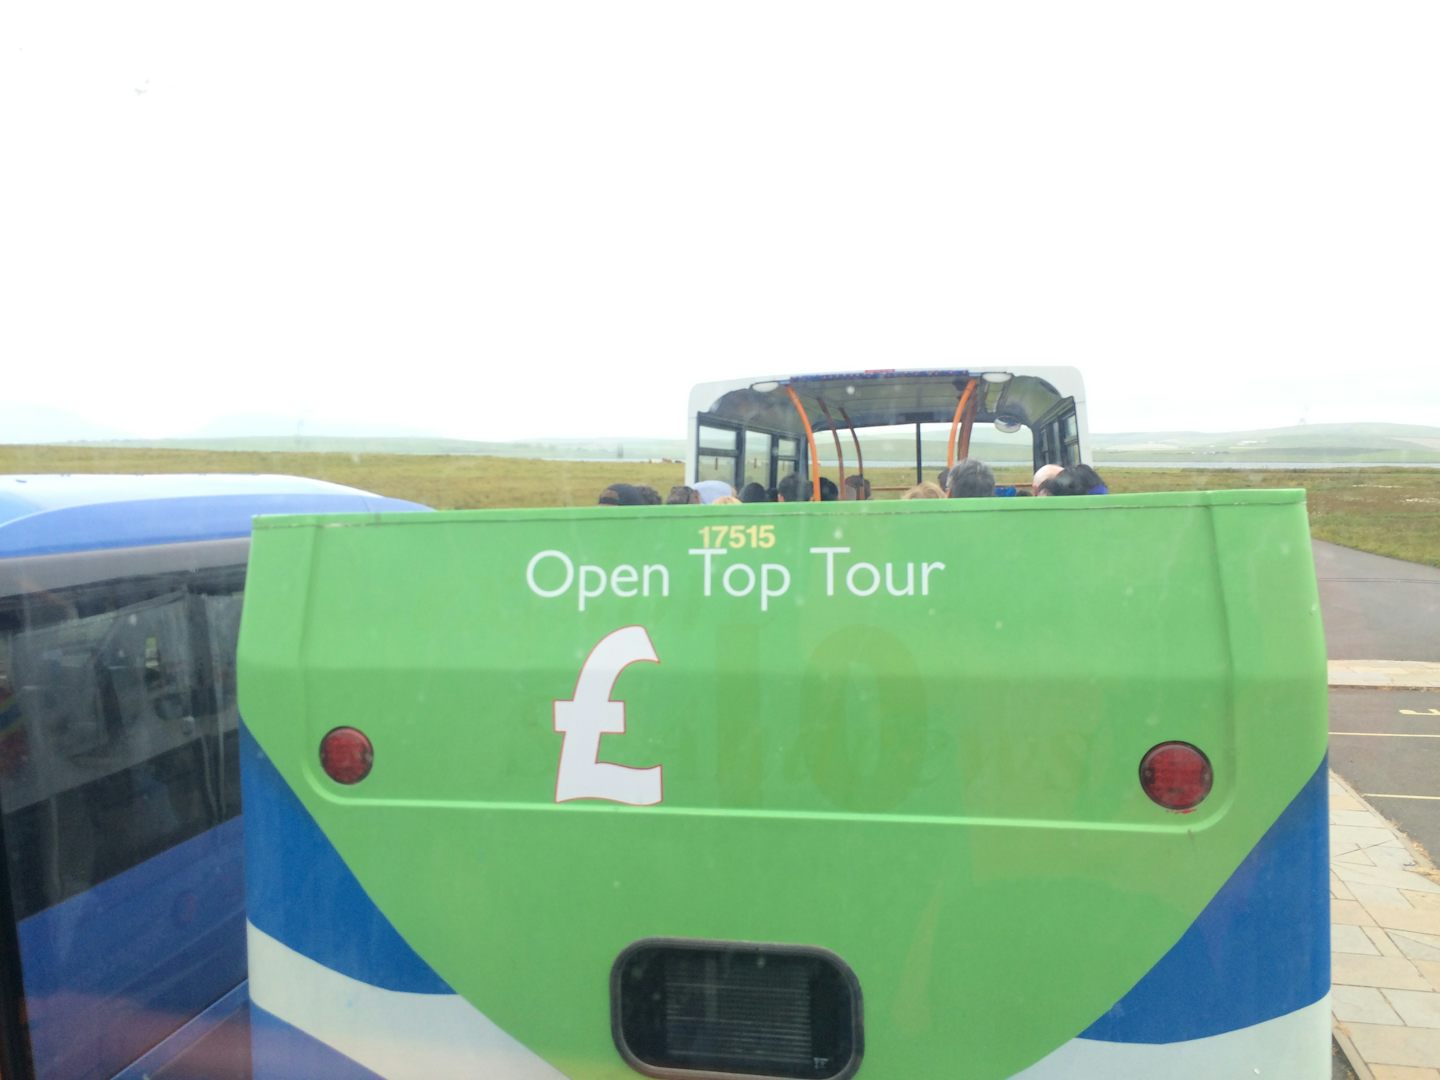 Kirkwall: The second T11 double decker exposing poor tourists to the cold w